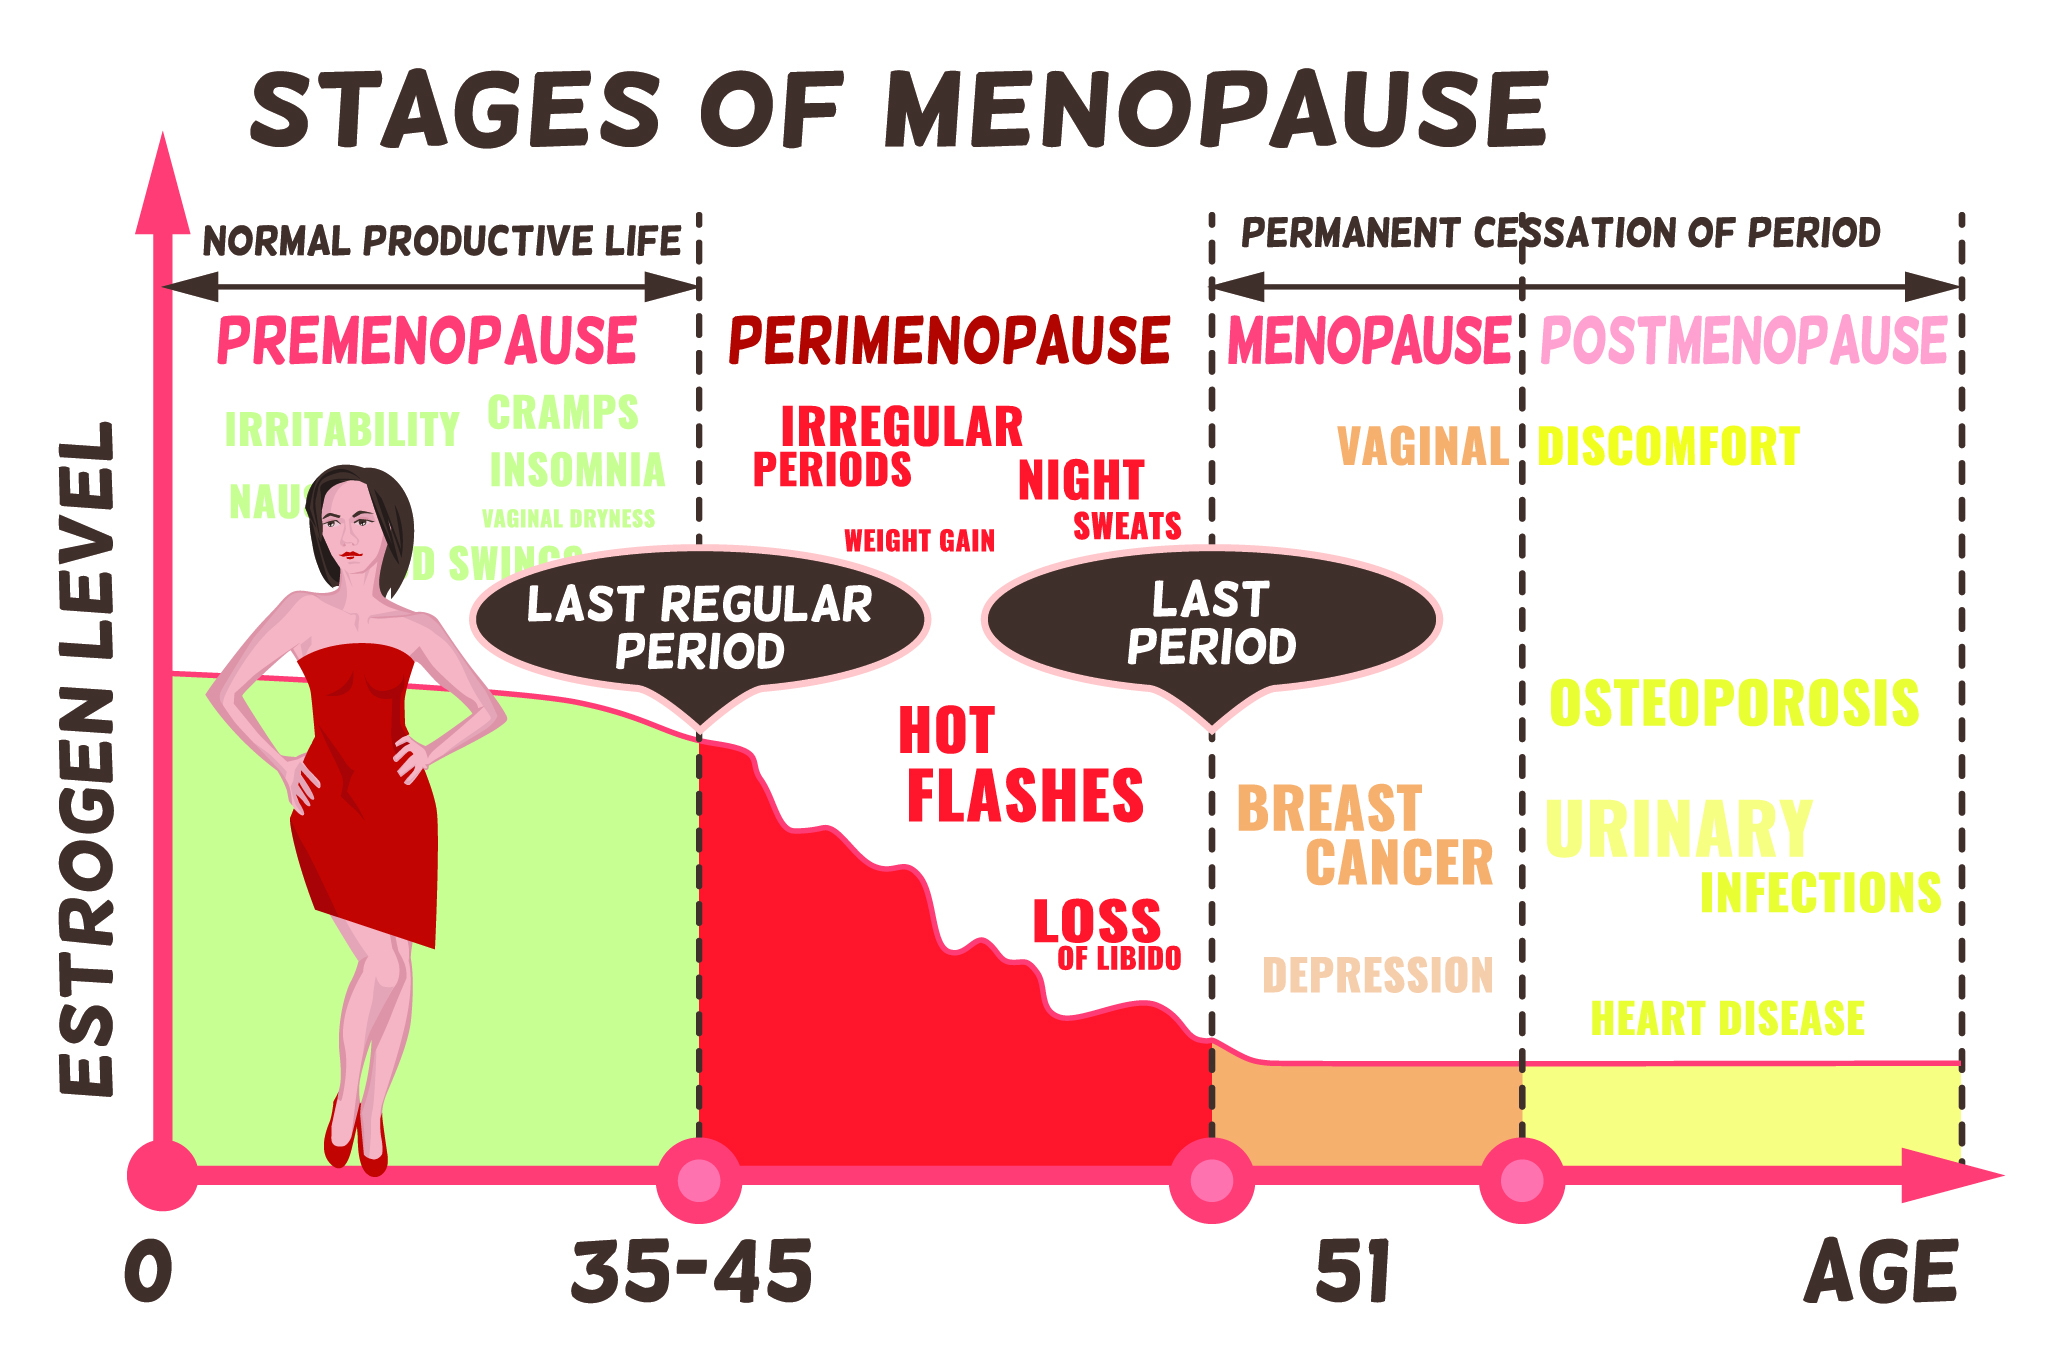 What are the signs of going through menopause